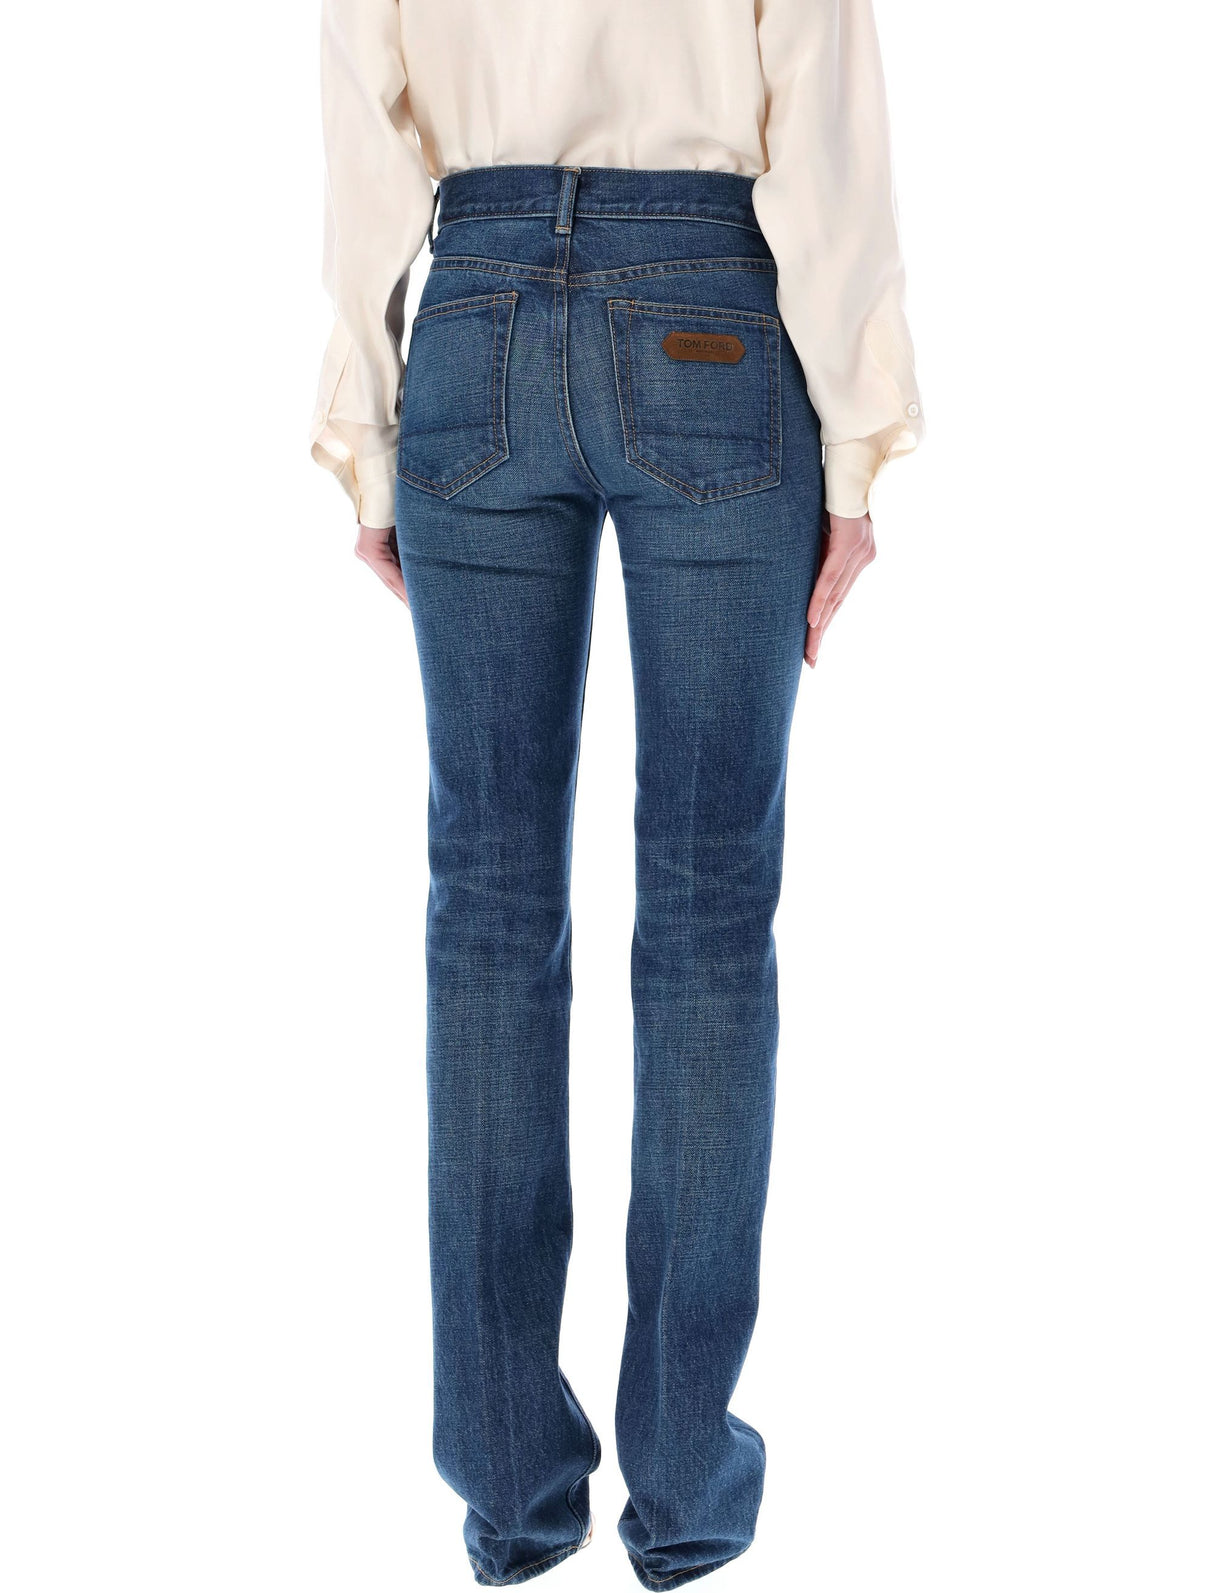 Mid-Blue Stone Washed Denim Flared Jeans for Women